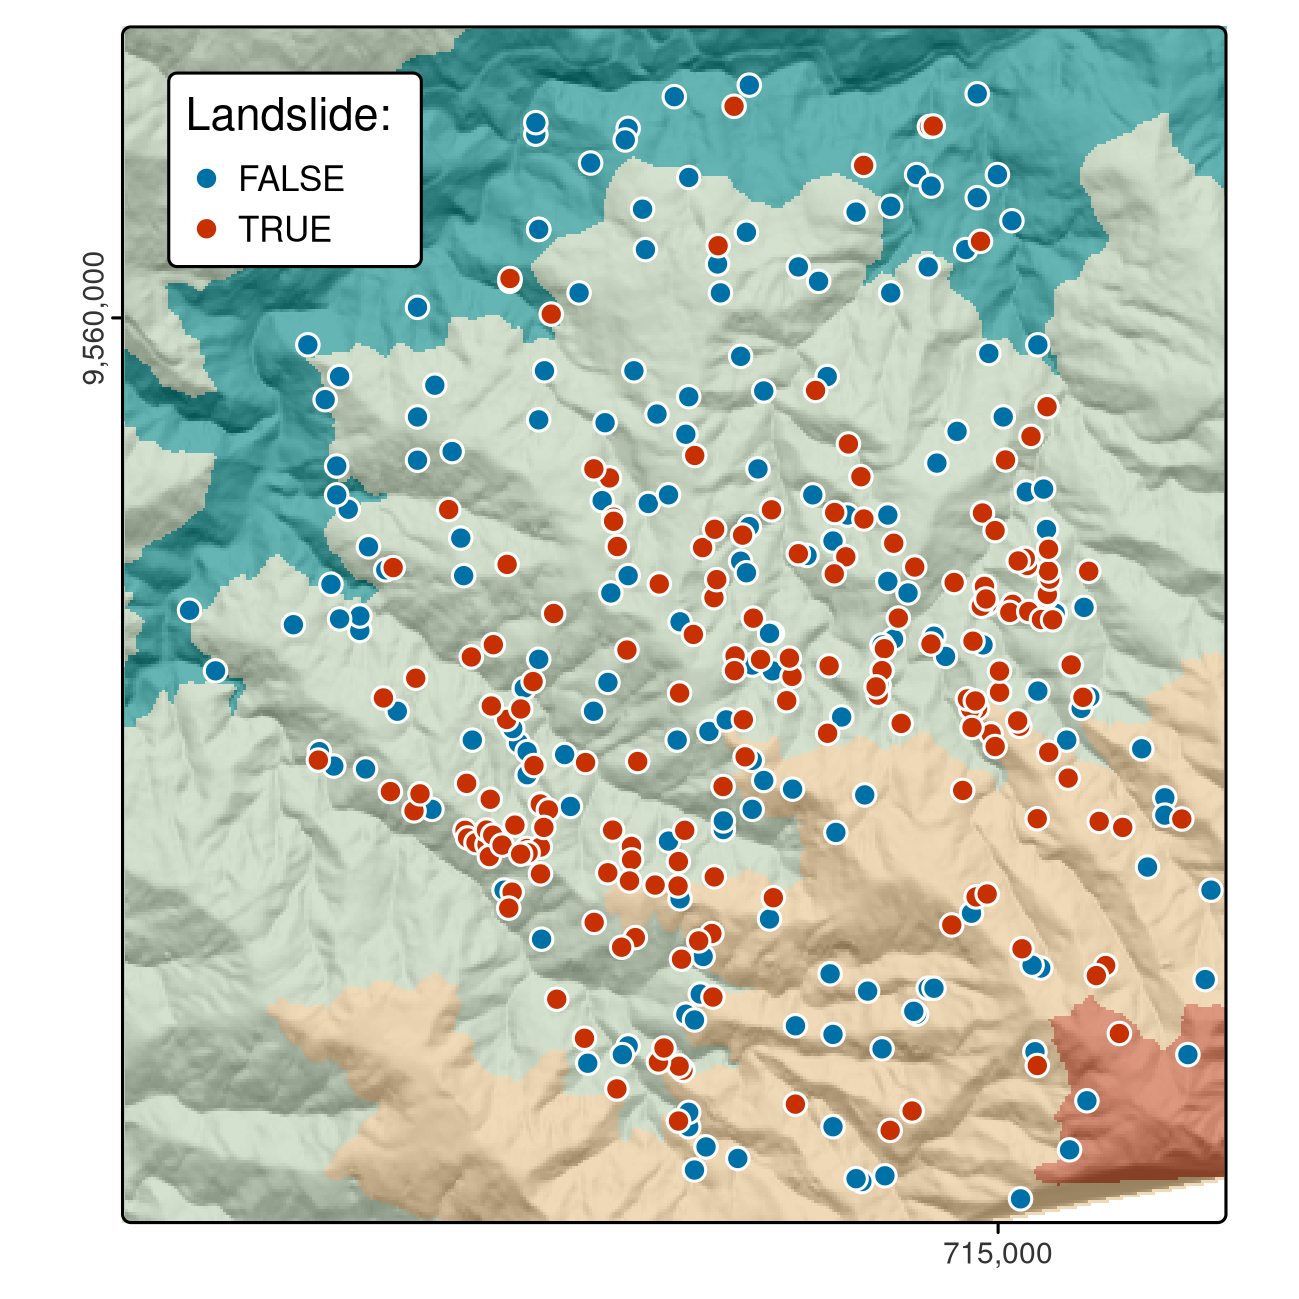 Landslide initiation points (red) and points unaffected by landsliding (blue) in Southern Ecuador.